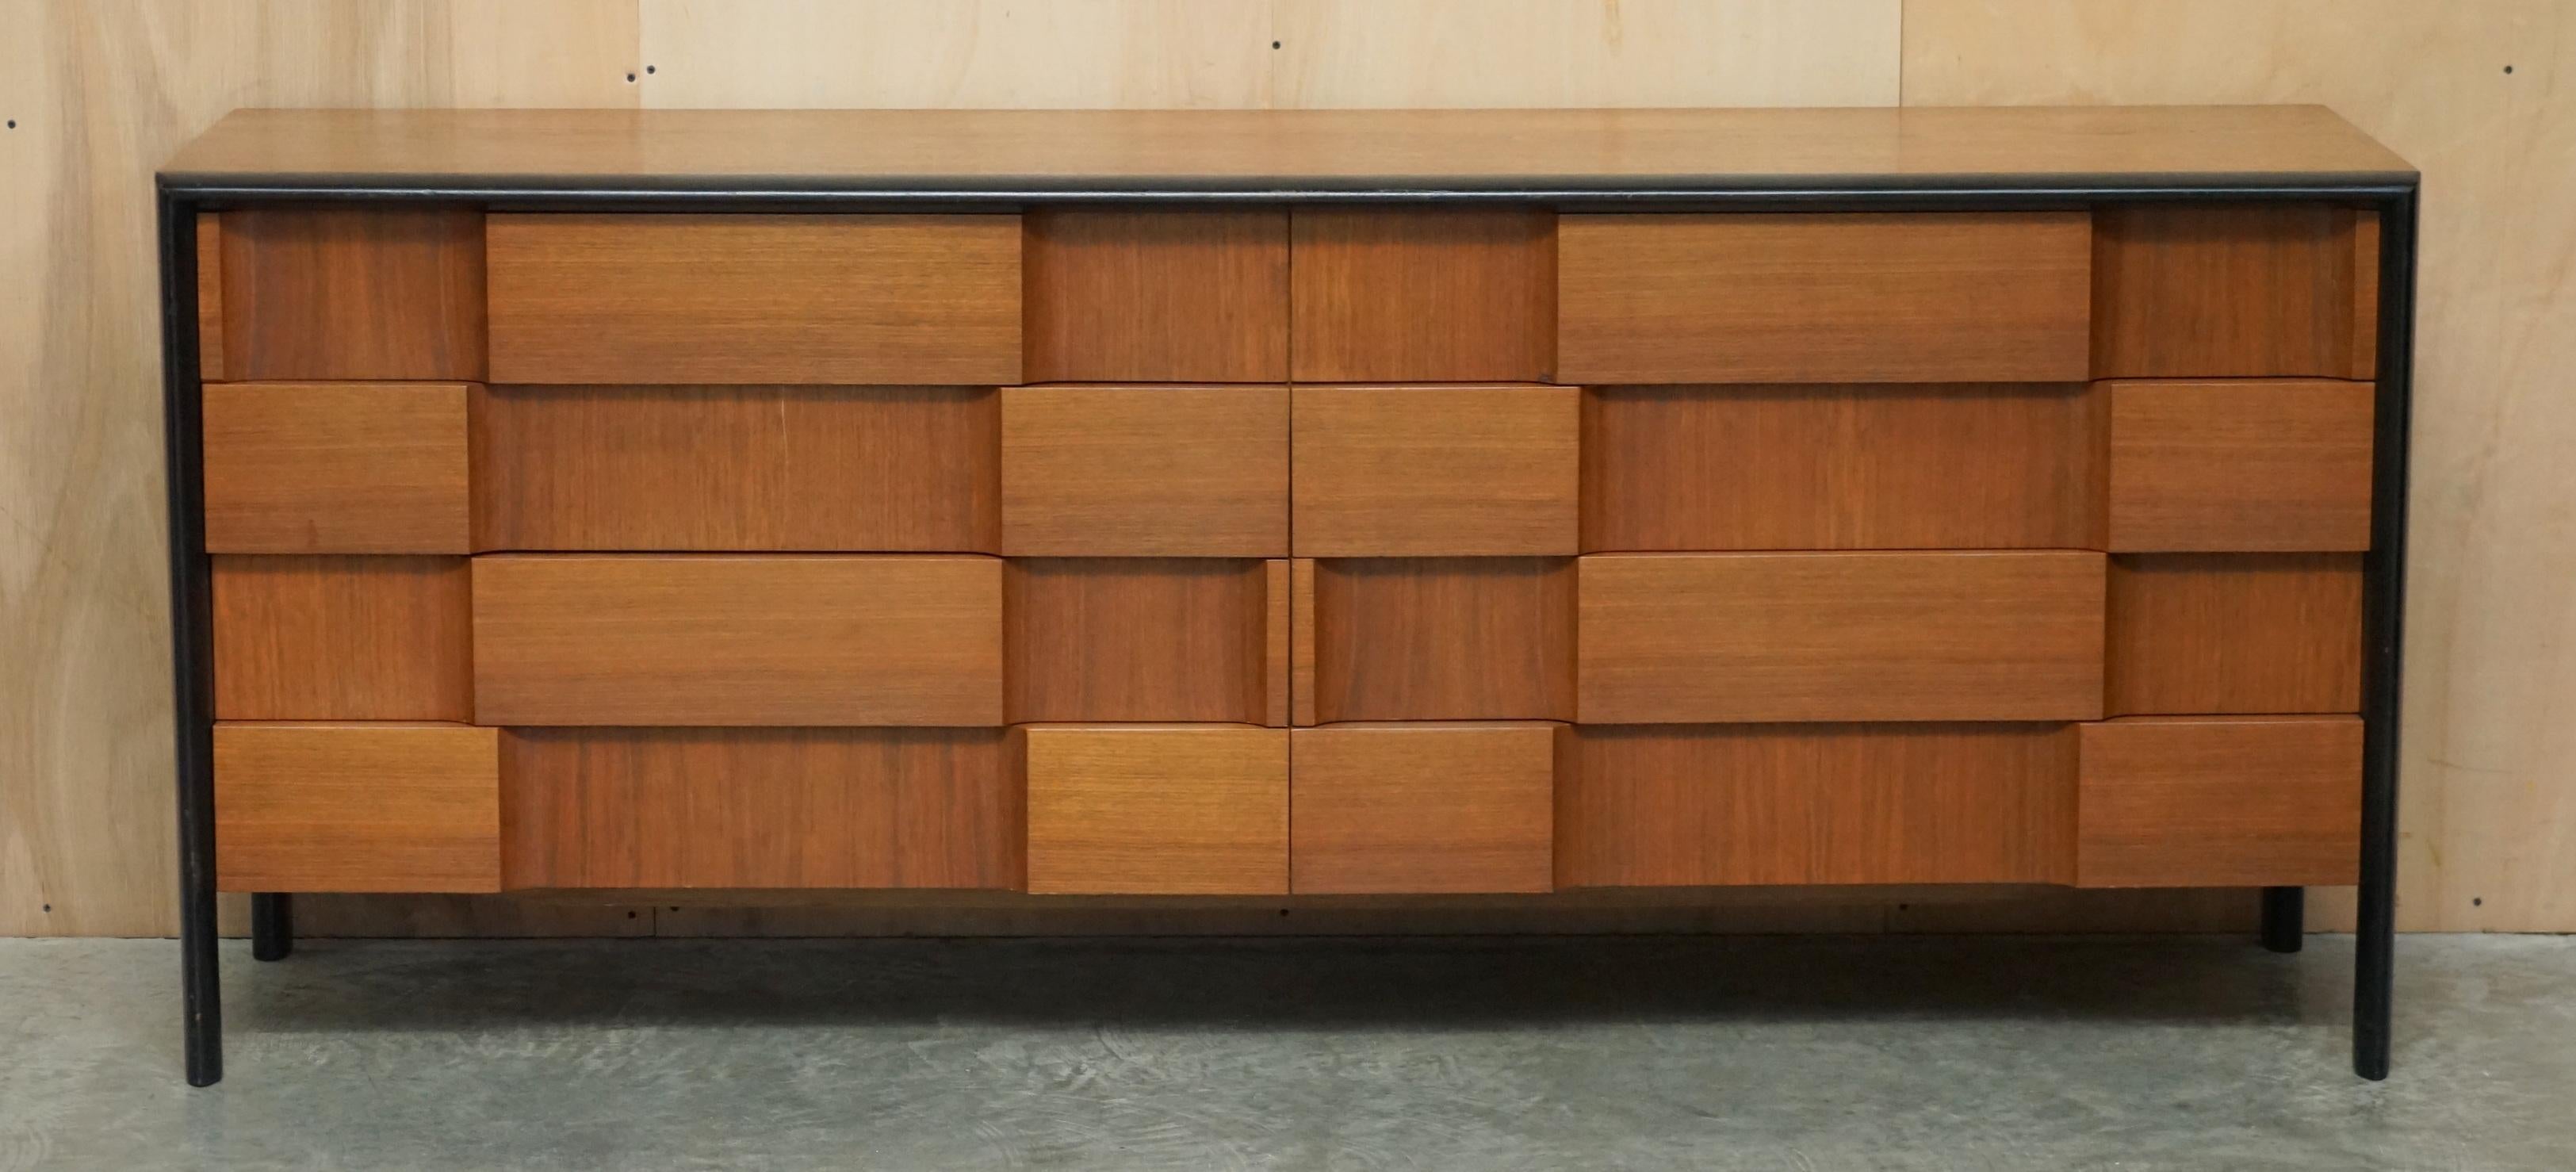 We are is delighted to offer for sale this very rare and highly collectable Edmond J Spence Checkerboard sideboard in light walnut circa 1960's 

Edmond J. Spence This very interesting sideboard by an American designer was created in the mid-20th